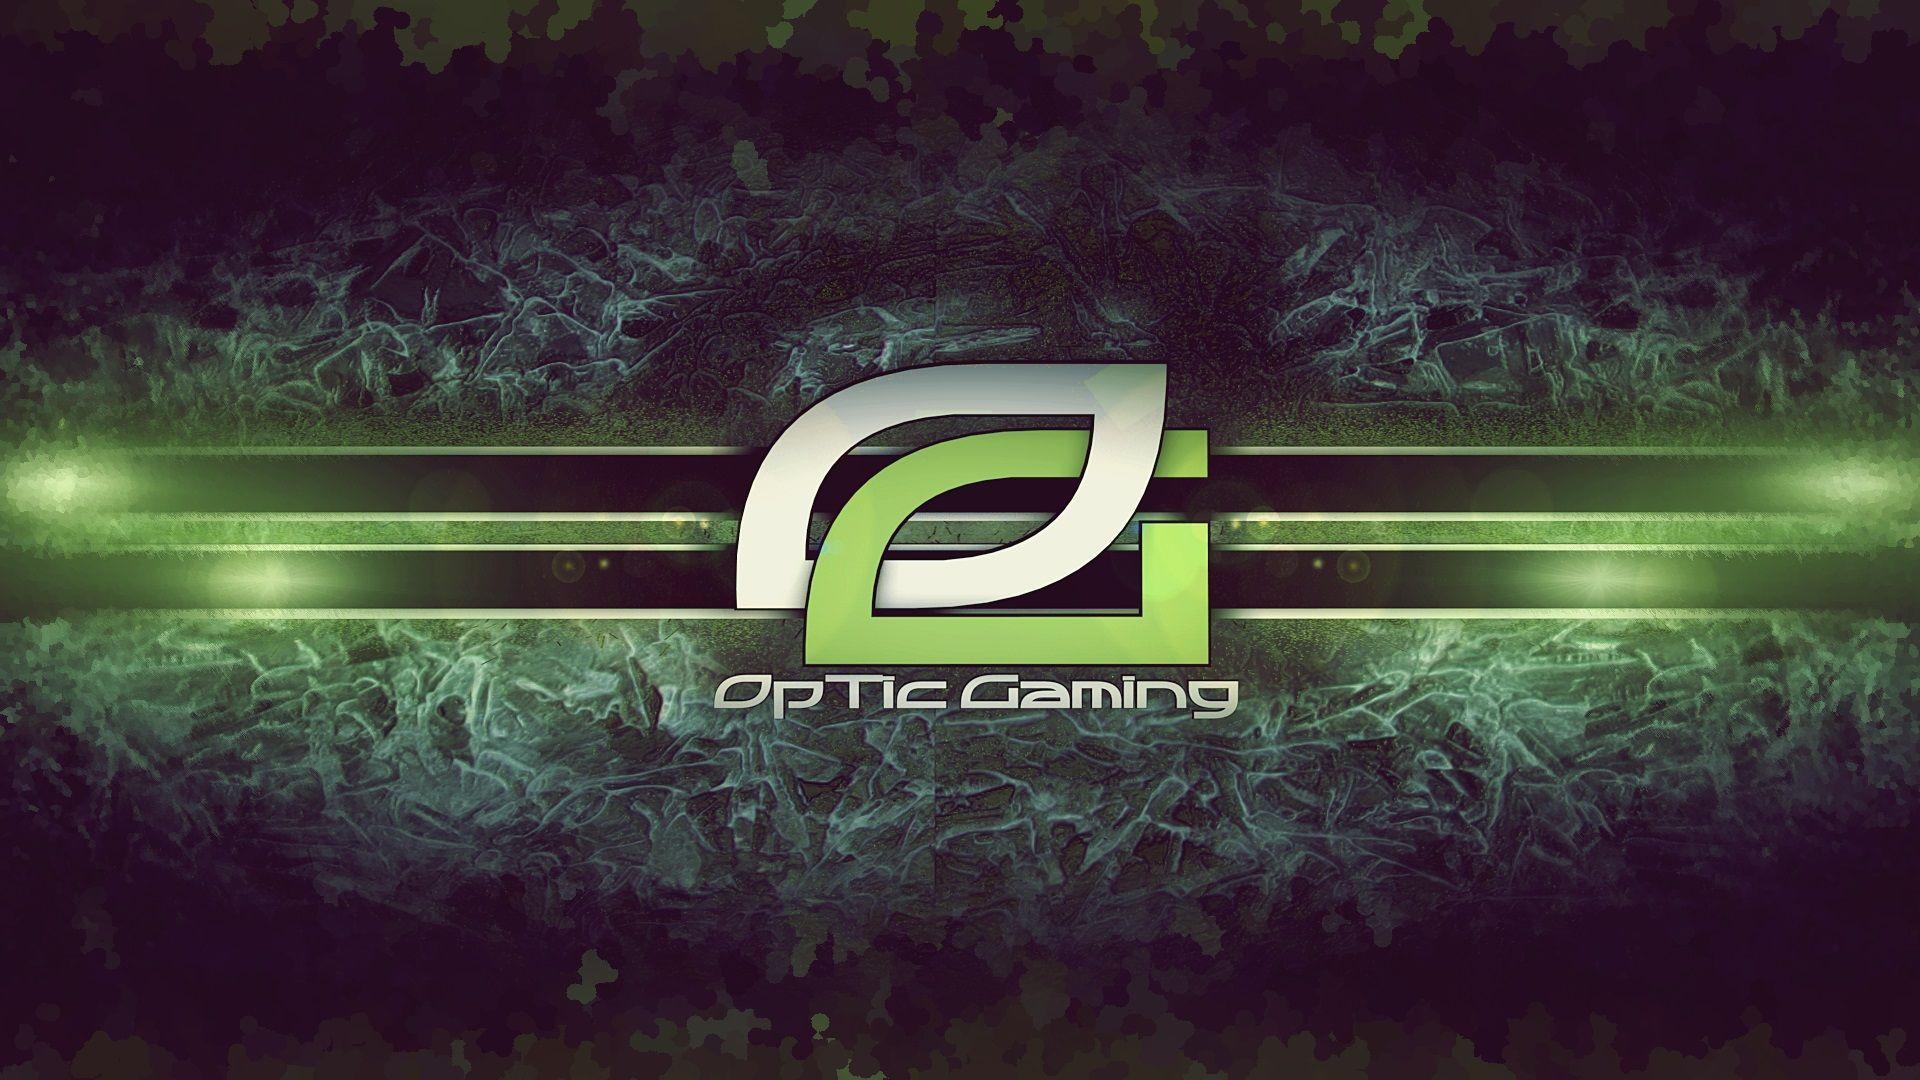 Optic Gaming Backgrounds